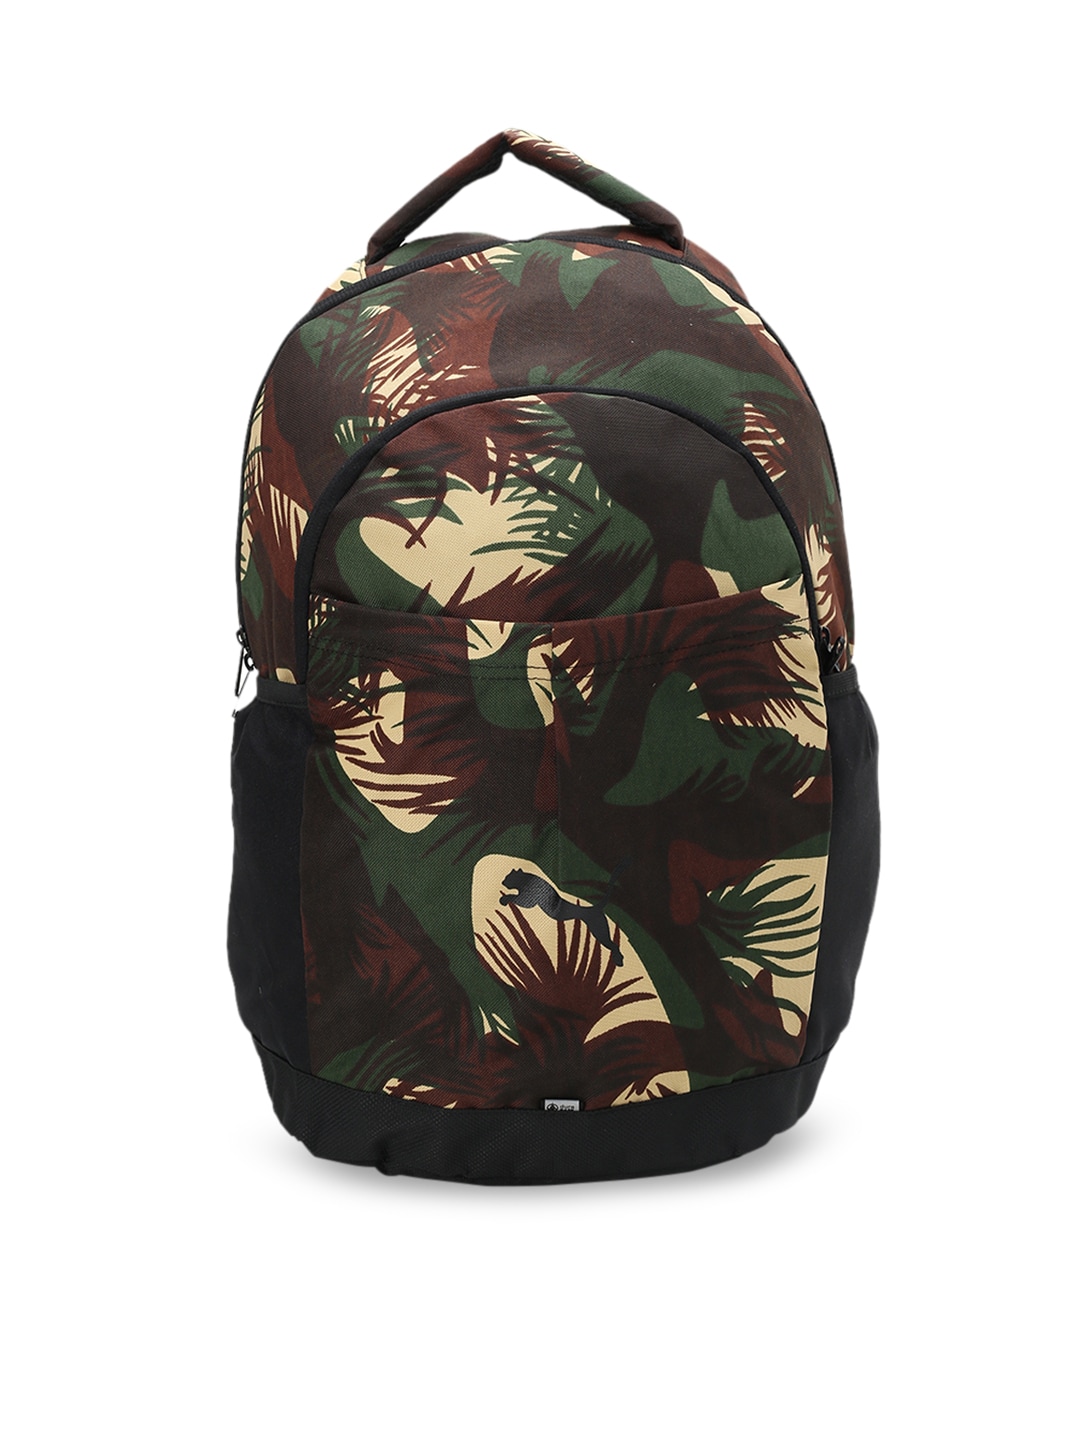 Puma Unisex Olive Green & Brown Camouflage Graphic Backpack Price in India